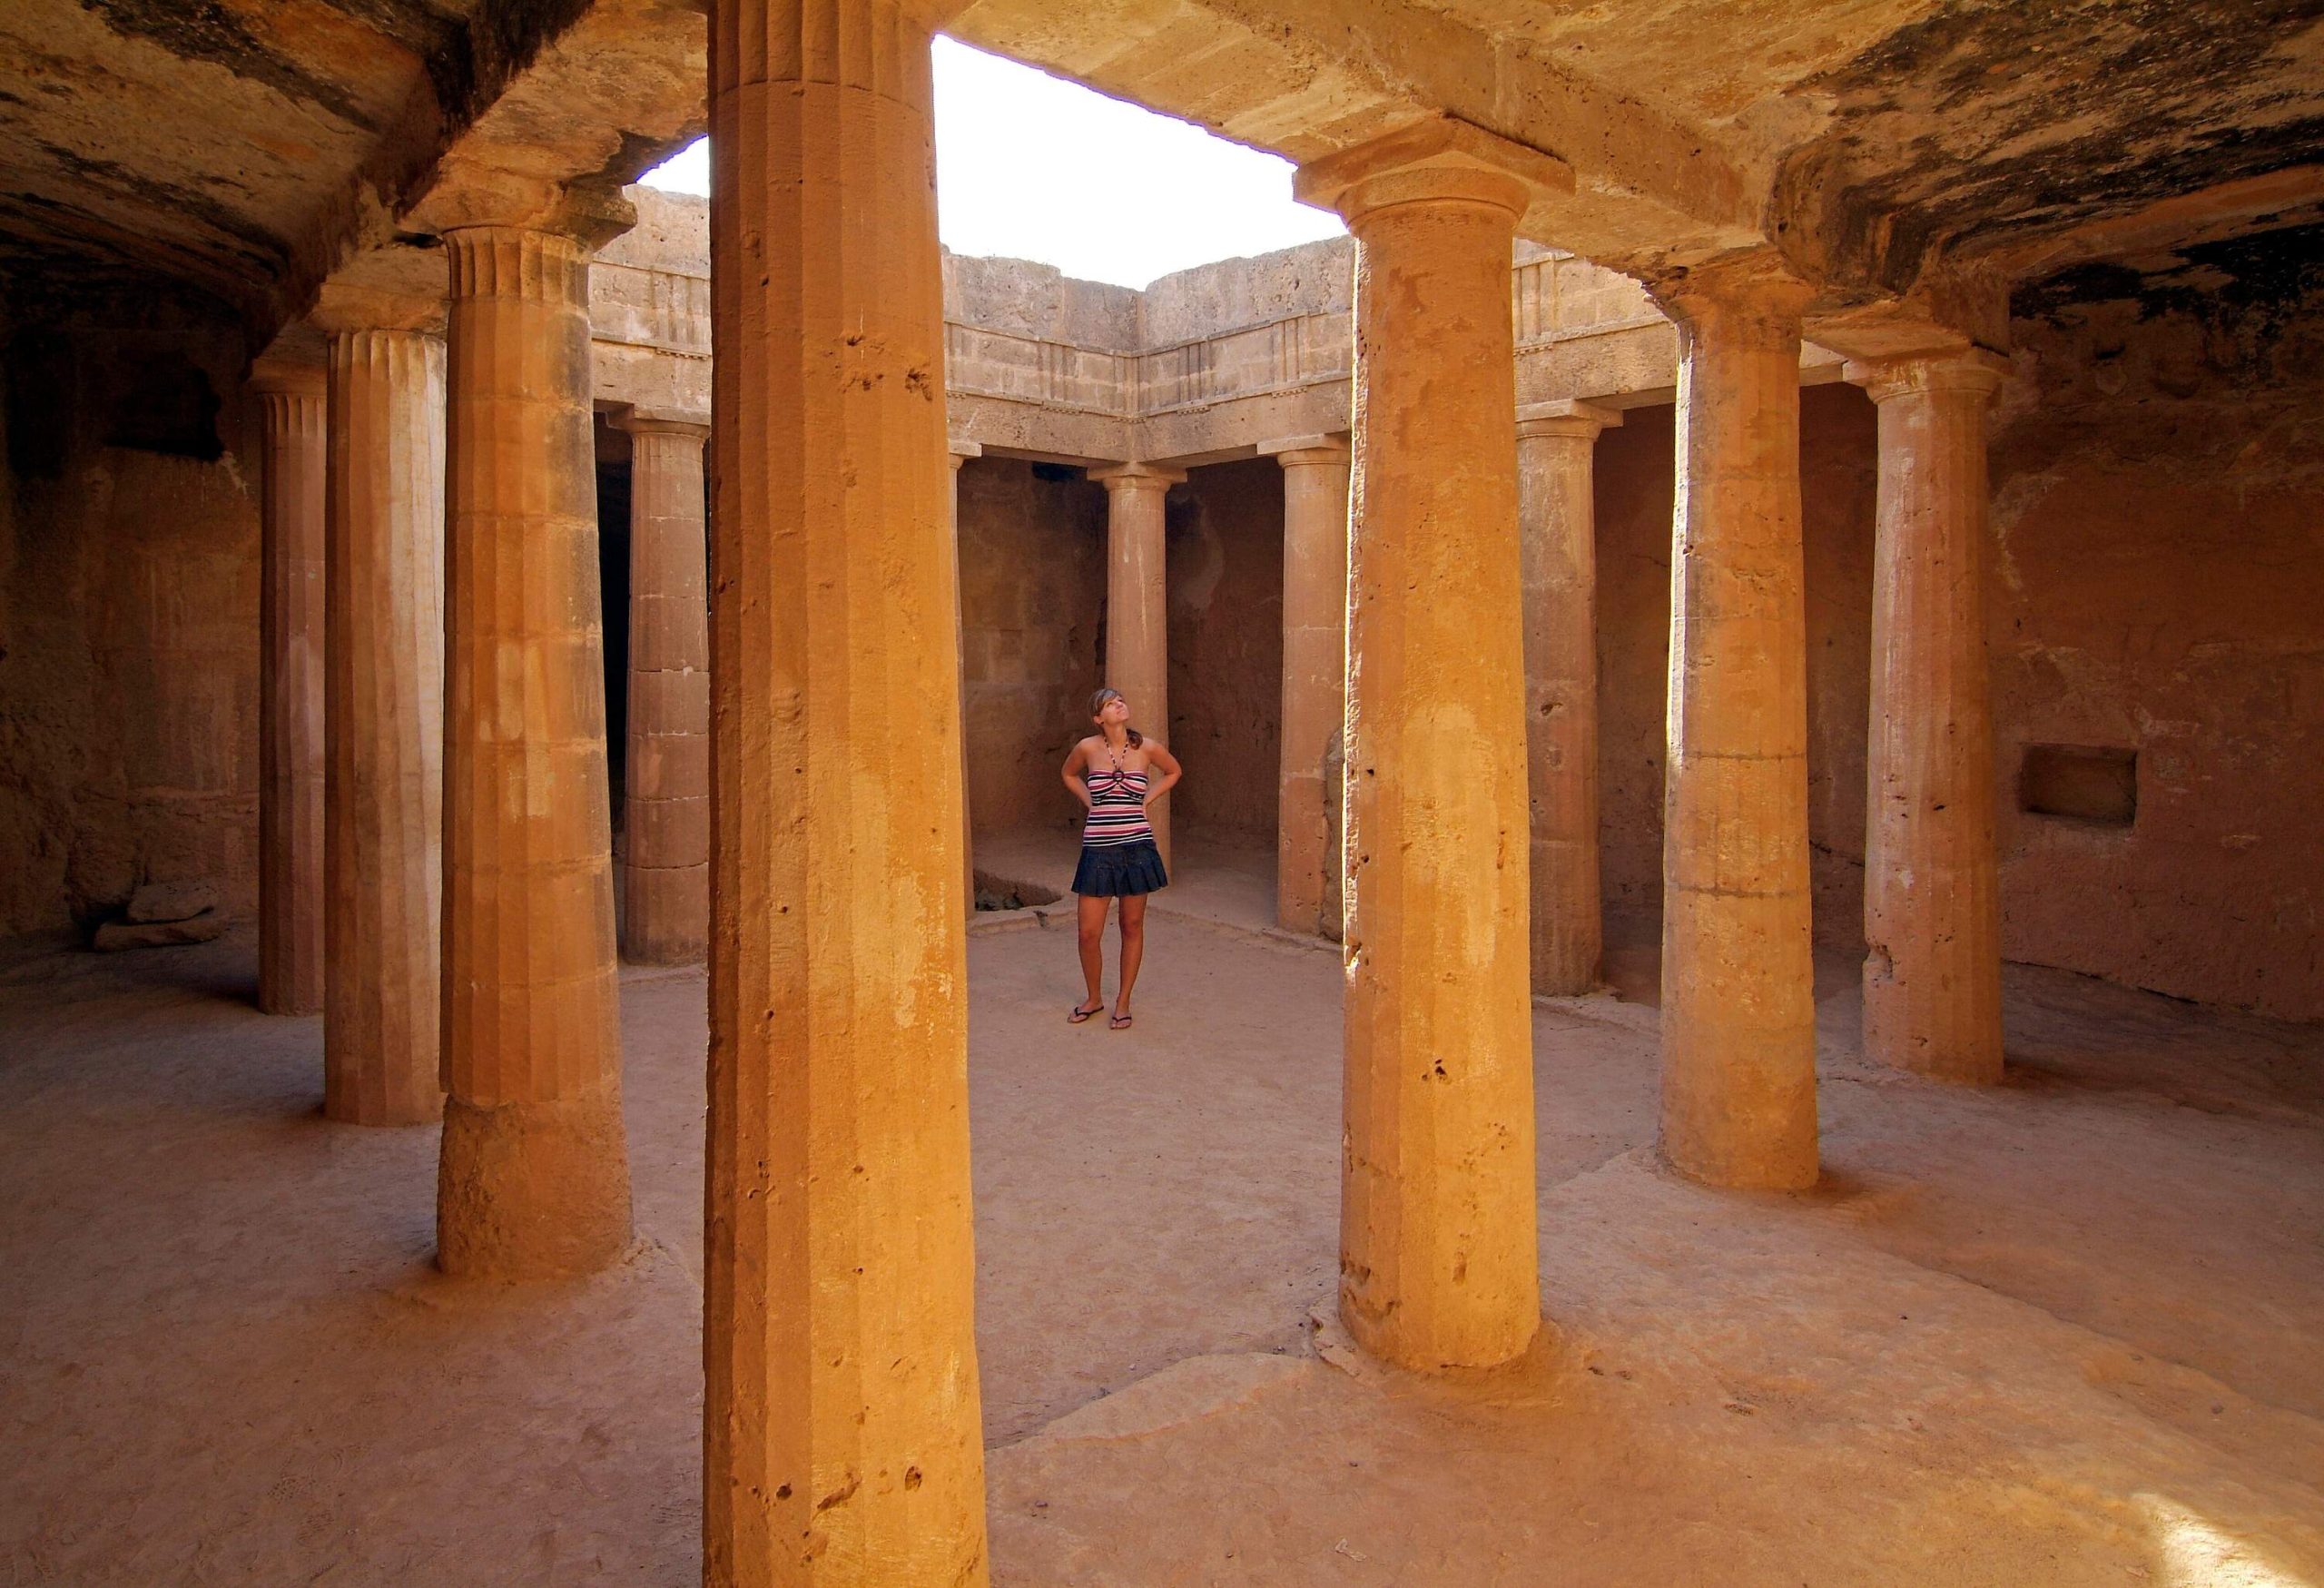 A lady tourist looking at the underground columns built during ancient times.